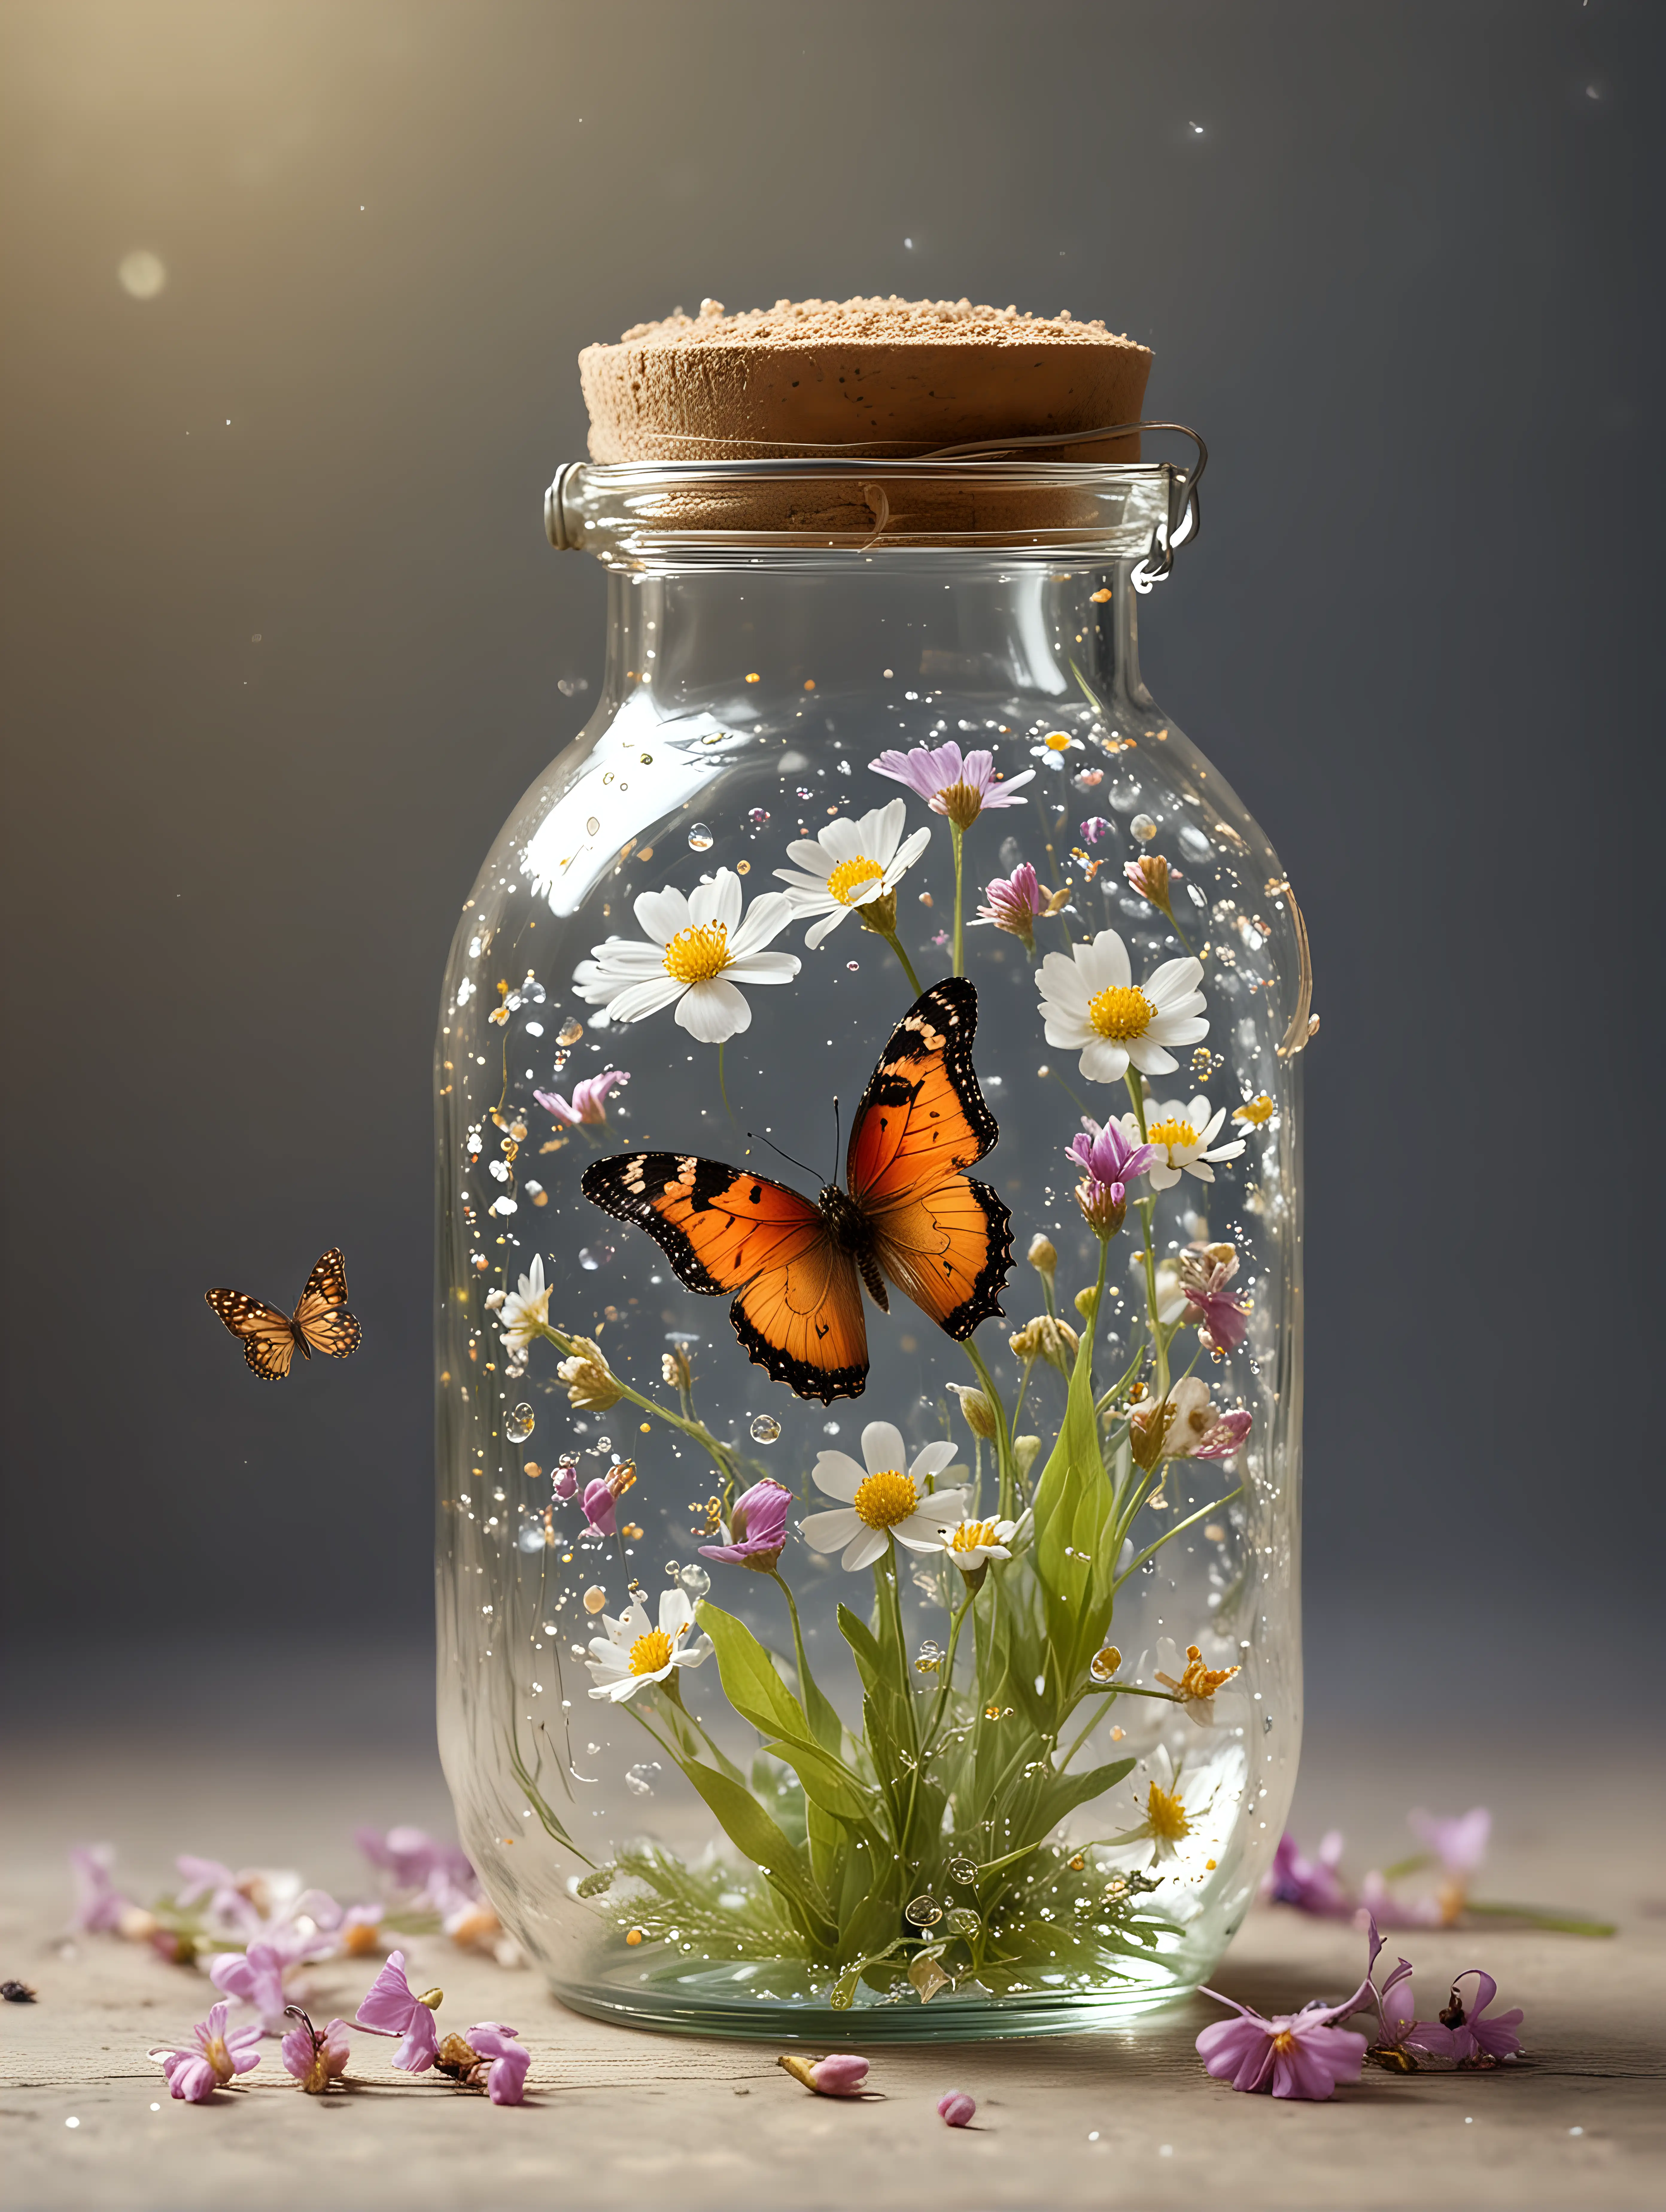 little glass jar looking alchymistic and spreading magical butterflie and sparkling flowers out of it